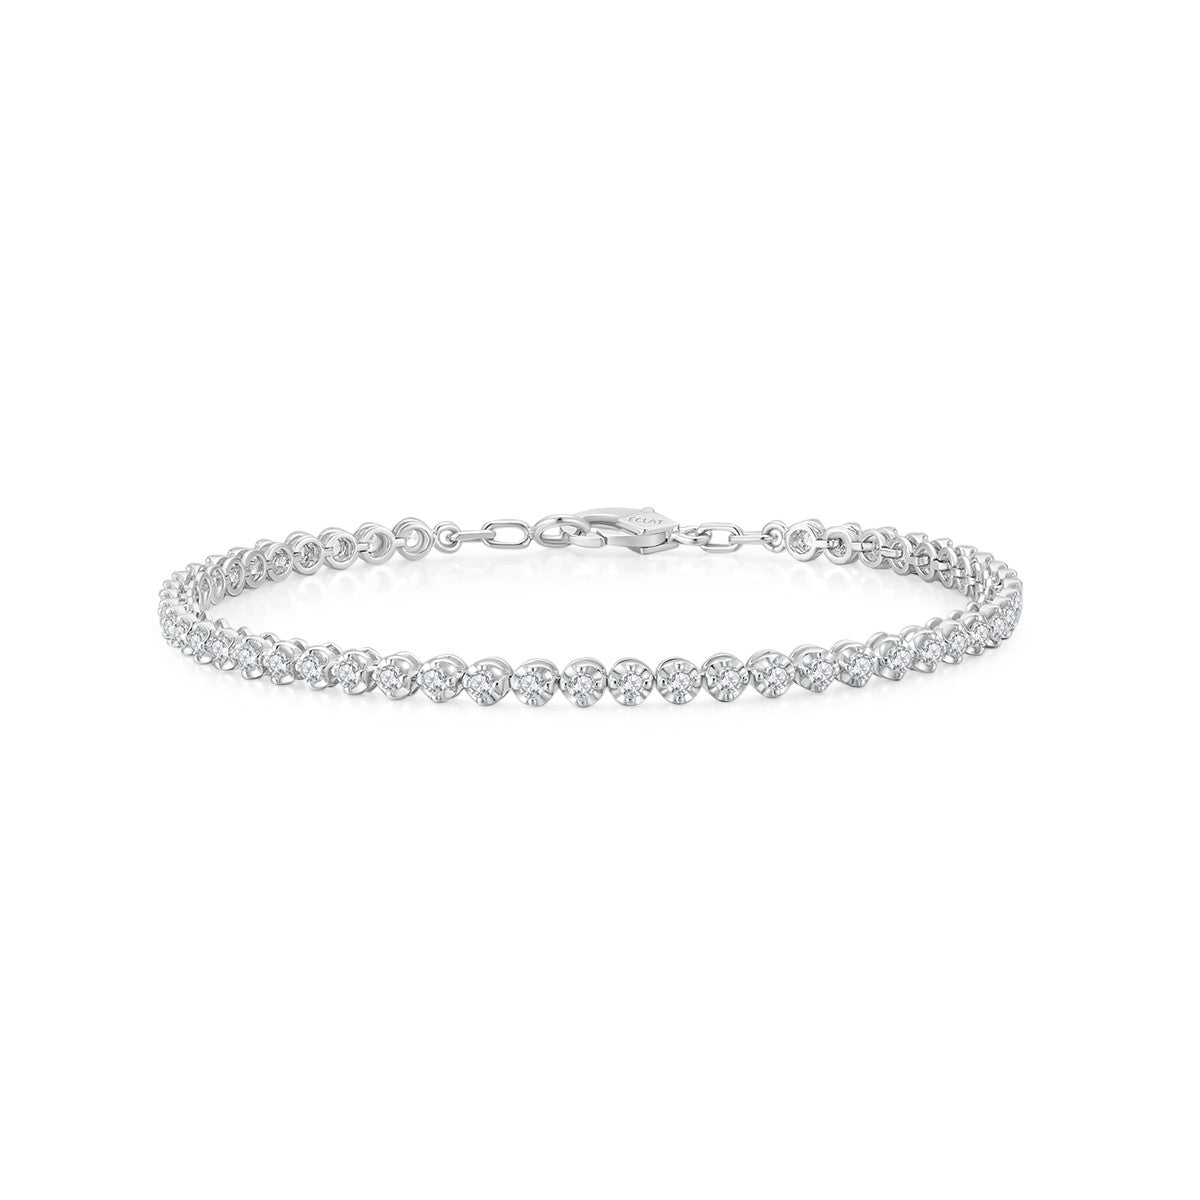 Alice Made This - Romeo and Juliet Sterling Silver Chain Bracelet Alice  Made This